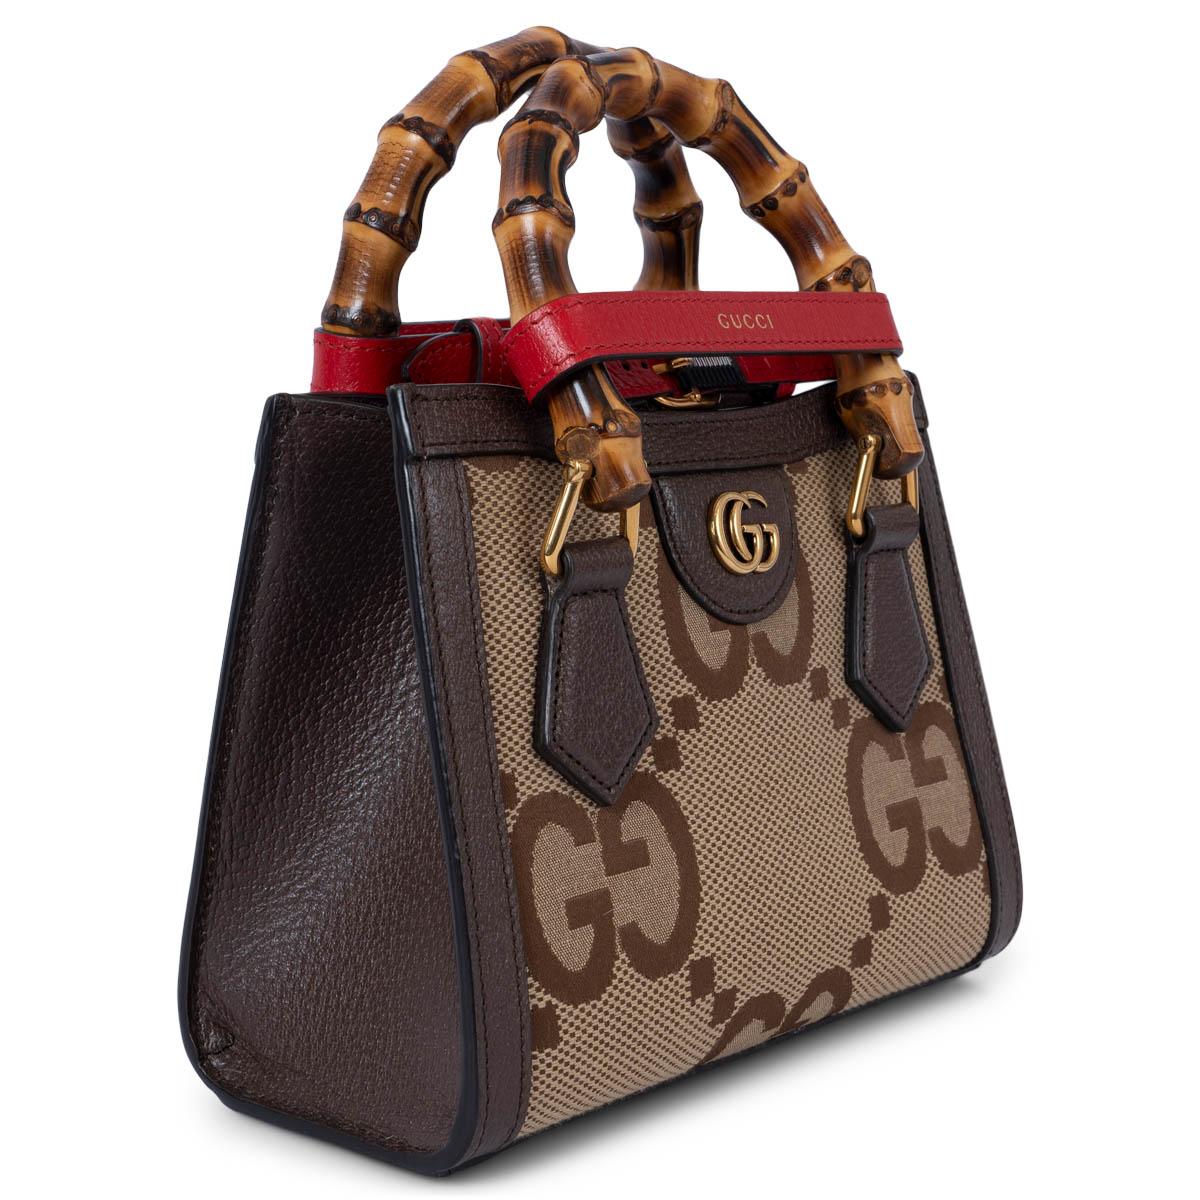 100% authentic Gucci Diana Mini tote bag in camel and ebony jumbo GG canvas featuring brown leather accents. The design comes with 2 decorative belt handle shapers in red leather. Lined in ivory canvas with an open pocket against the back. Has been